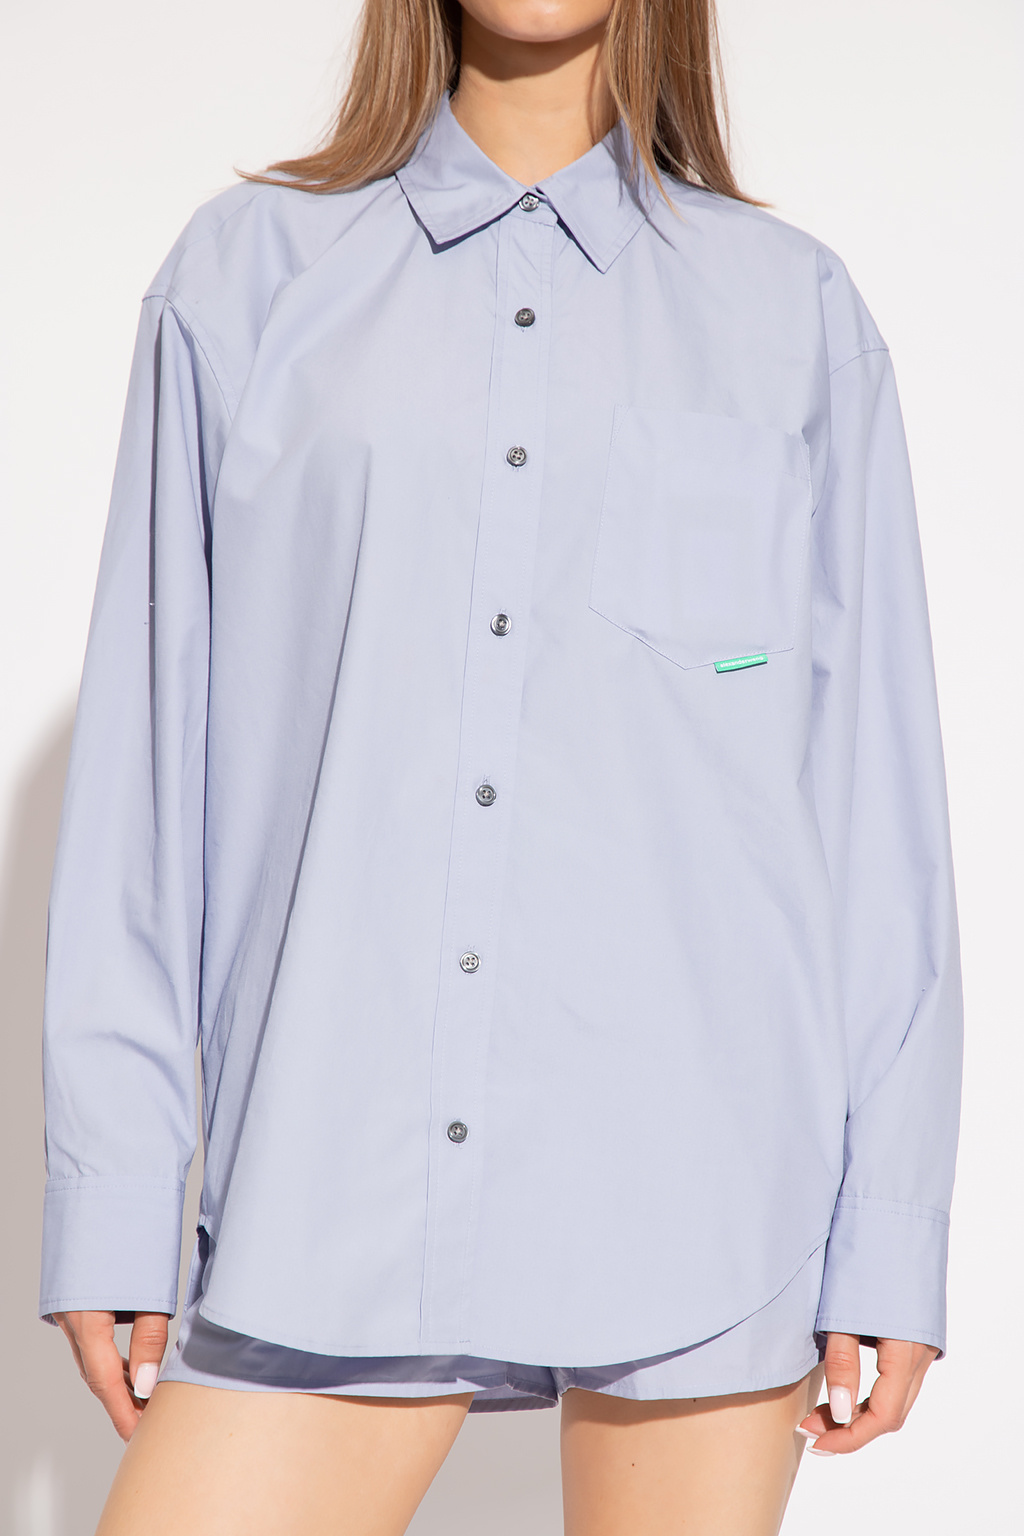 Relaxed - fitting shirt T by Alexander Wang - logo wear jackets 